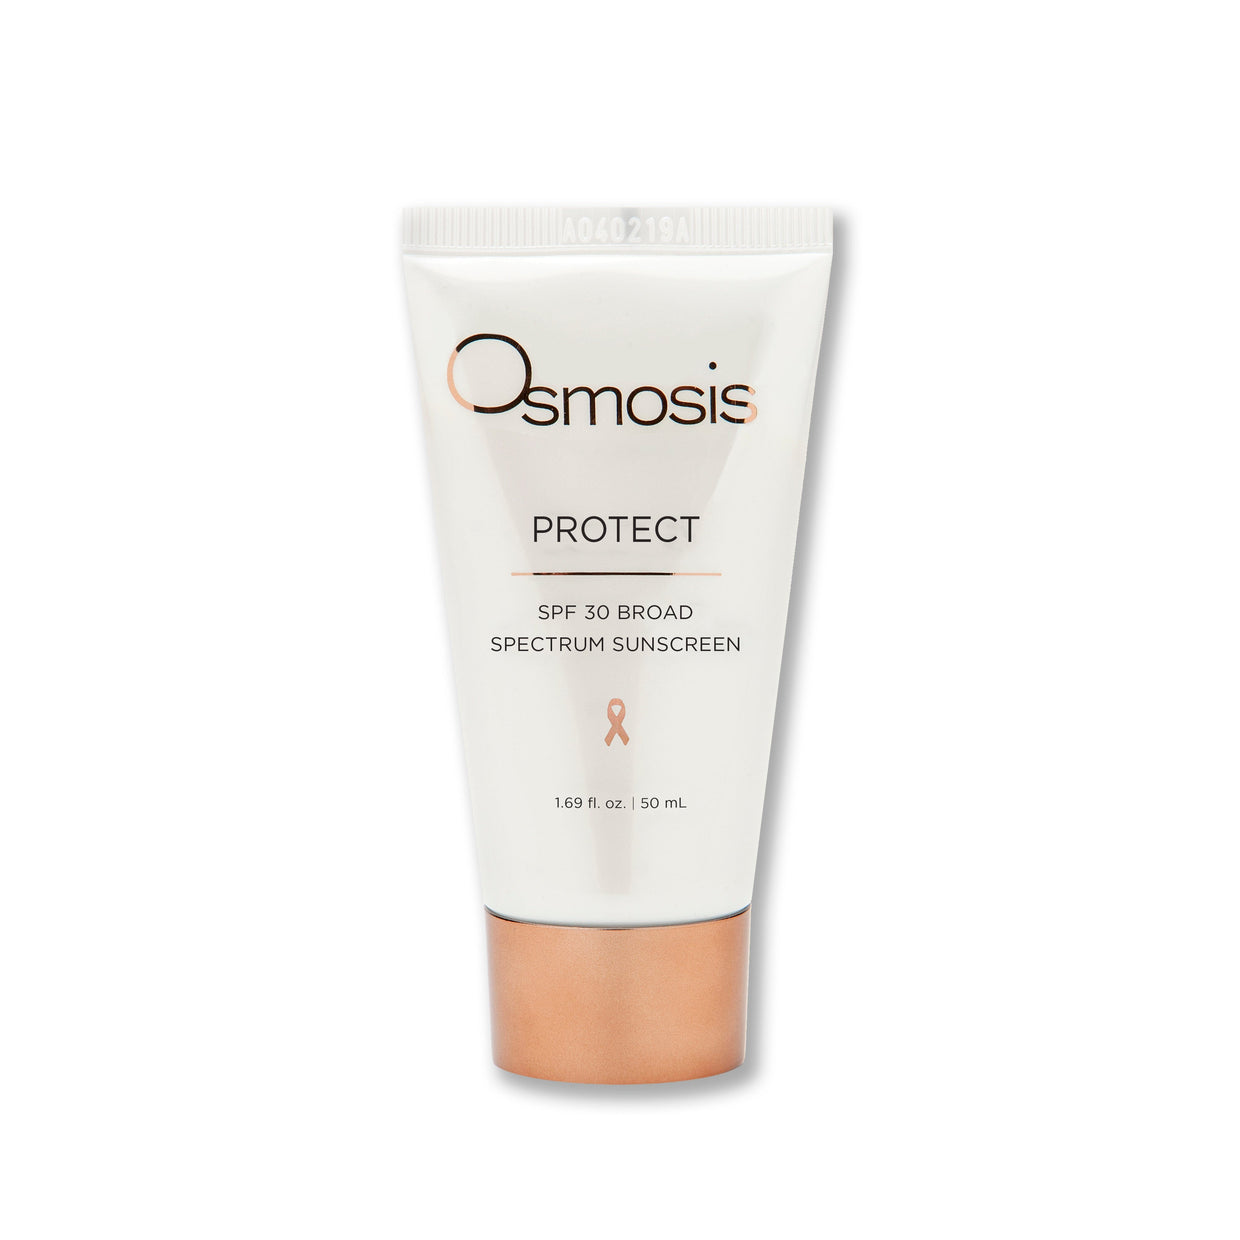 Osmosis Protect SPF 30 Broad Spectrum Sunscreen Osmosis Beauty 1.69 fl. oz. Shop at Exclusive Beauty Club